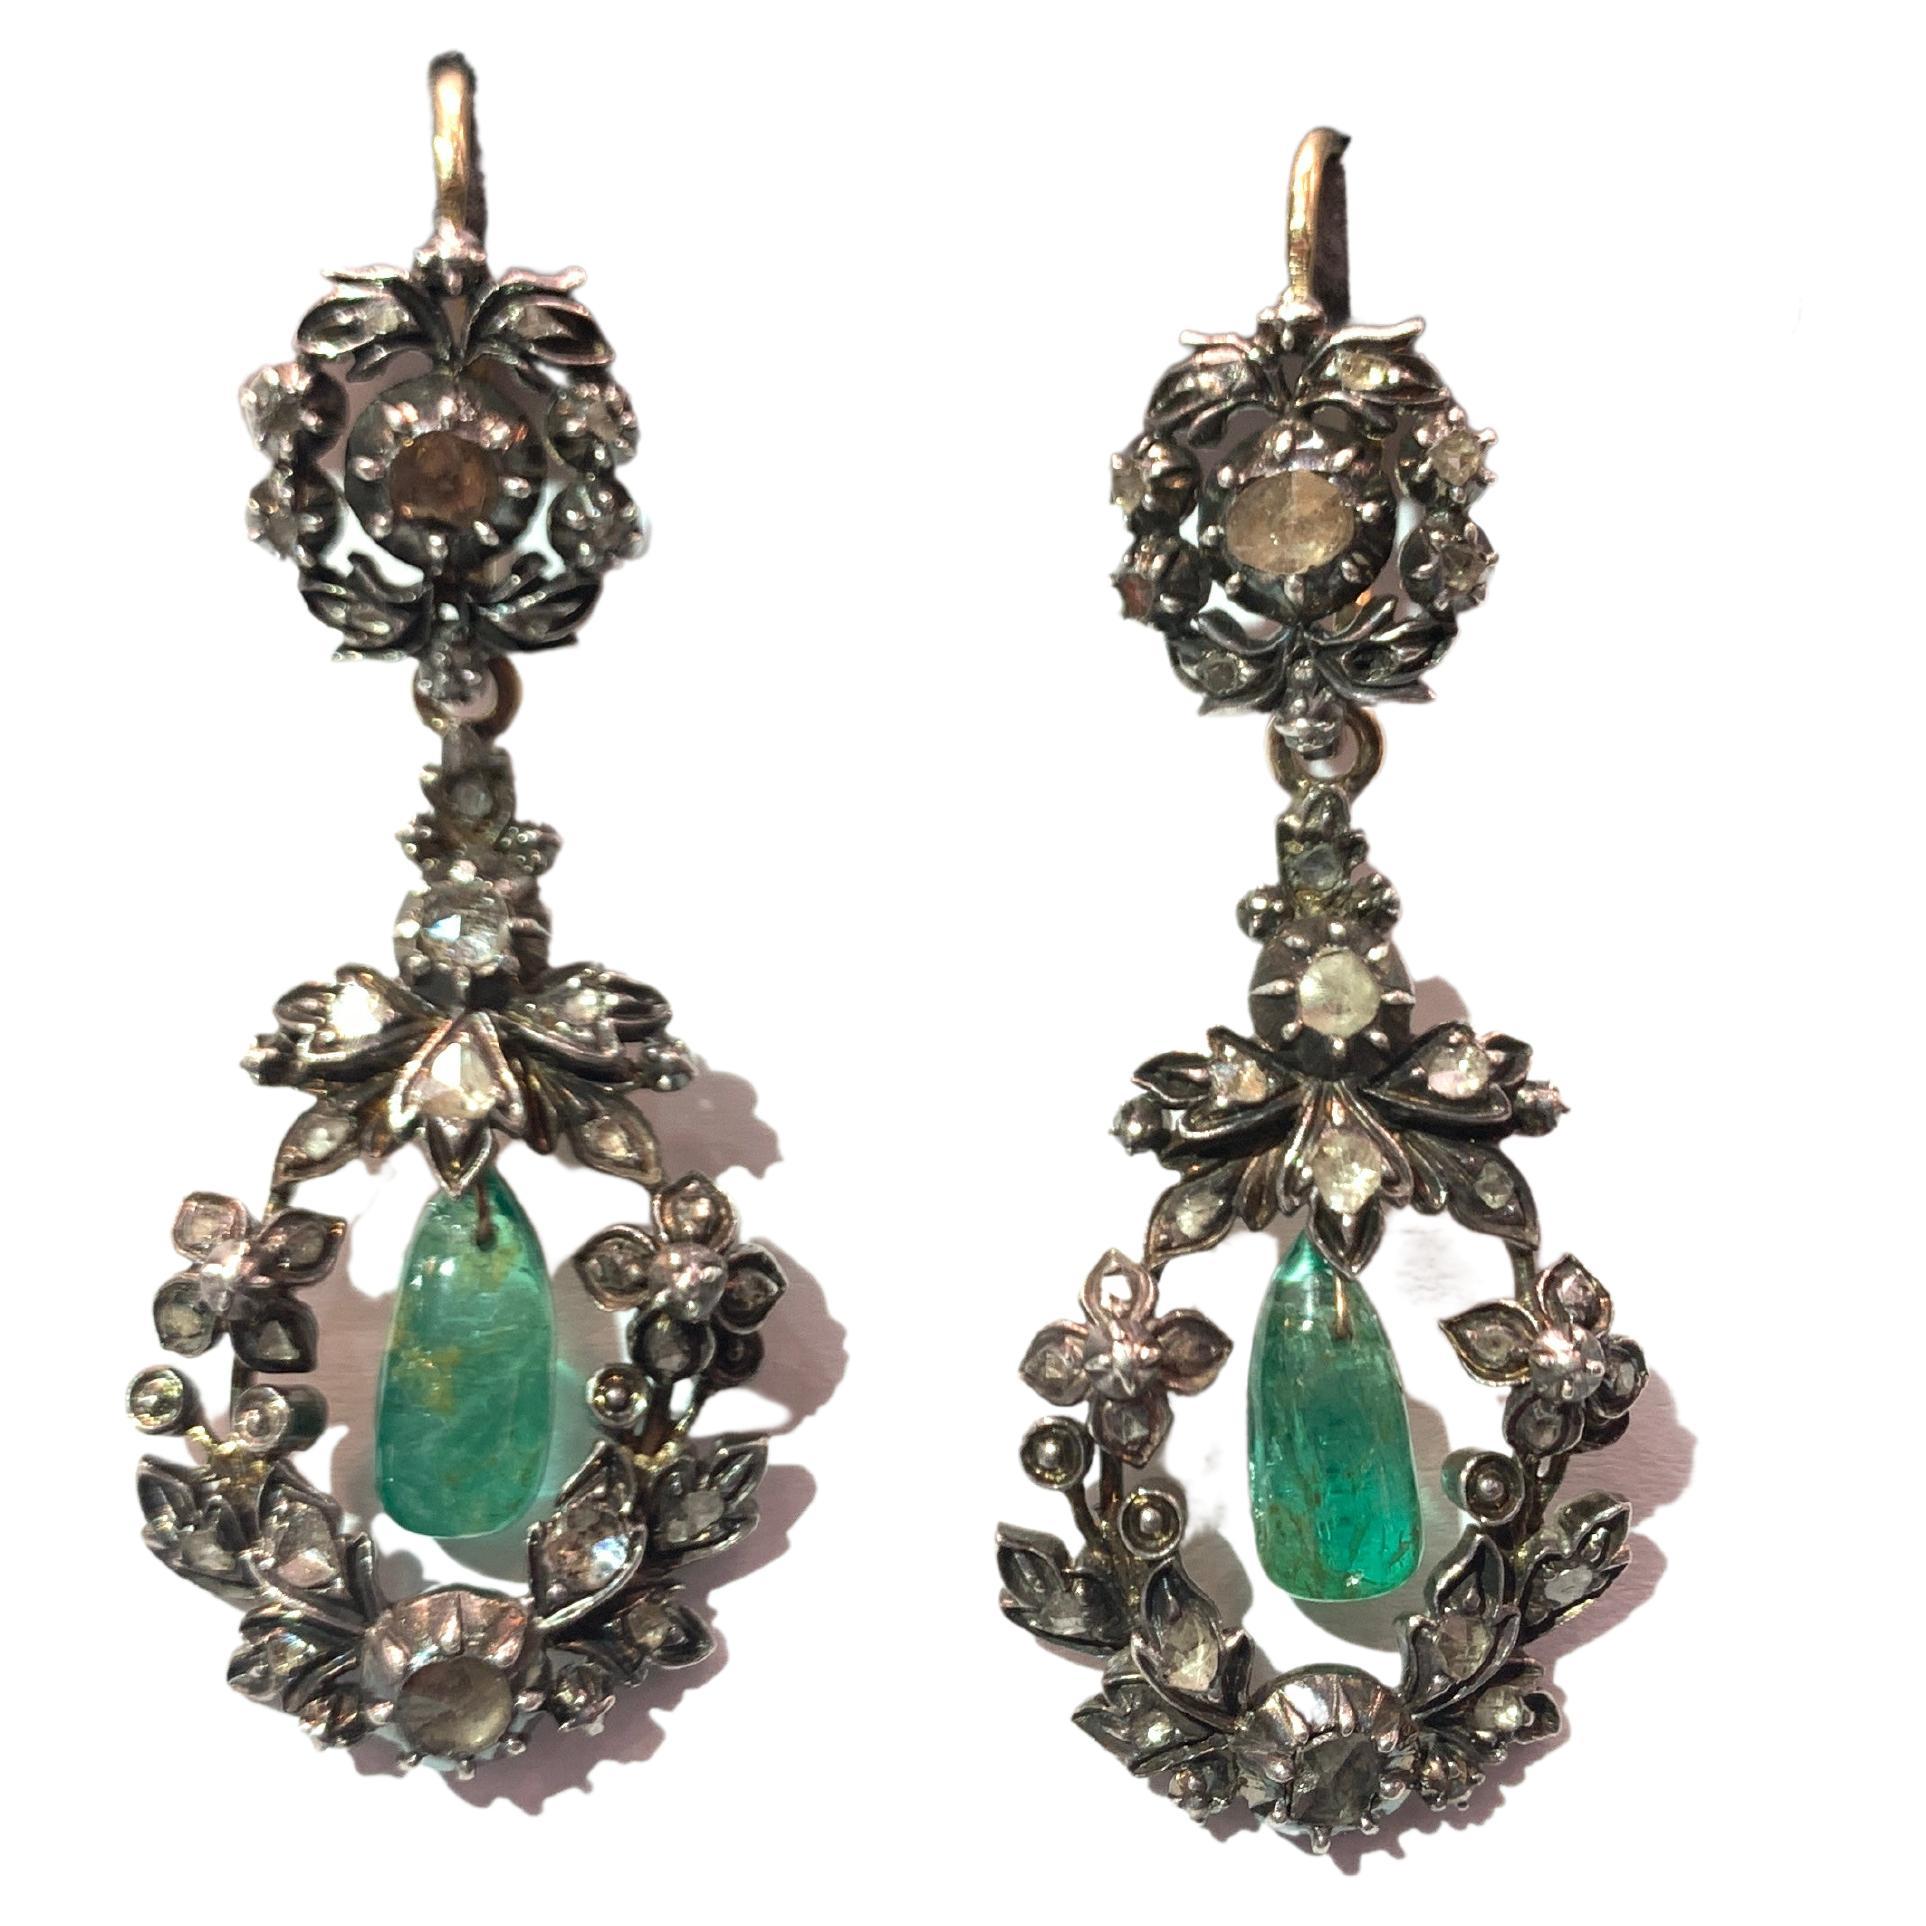 Antique Emerald & Diamond Day & Night Earrings

A pair of 18 karat gold and silver earrings with floral motifs set with 2 cabochon emeralds framed by rose cut  diamonds. Detachable bottoms

Day Length: 0.88